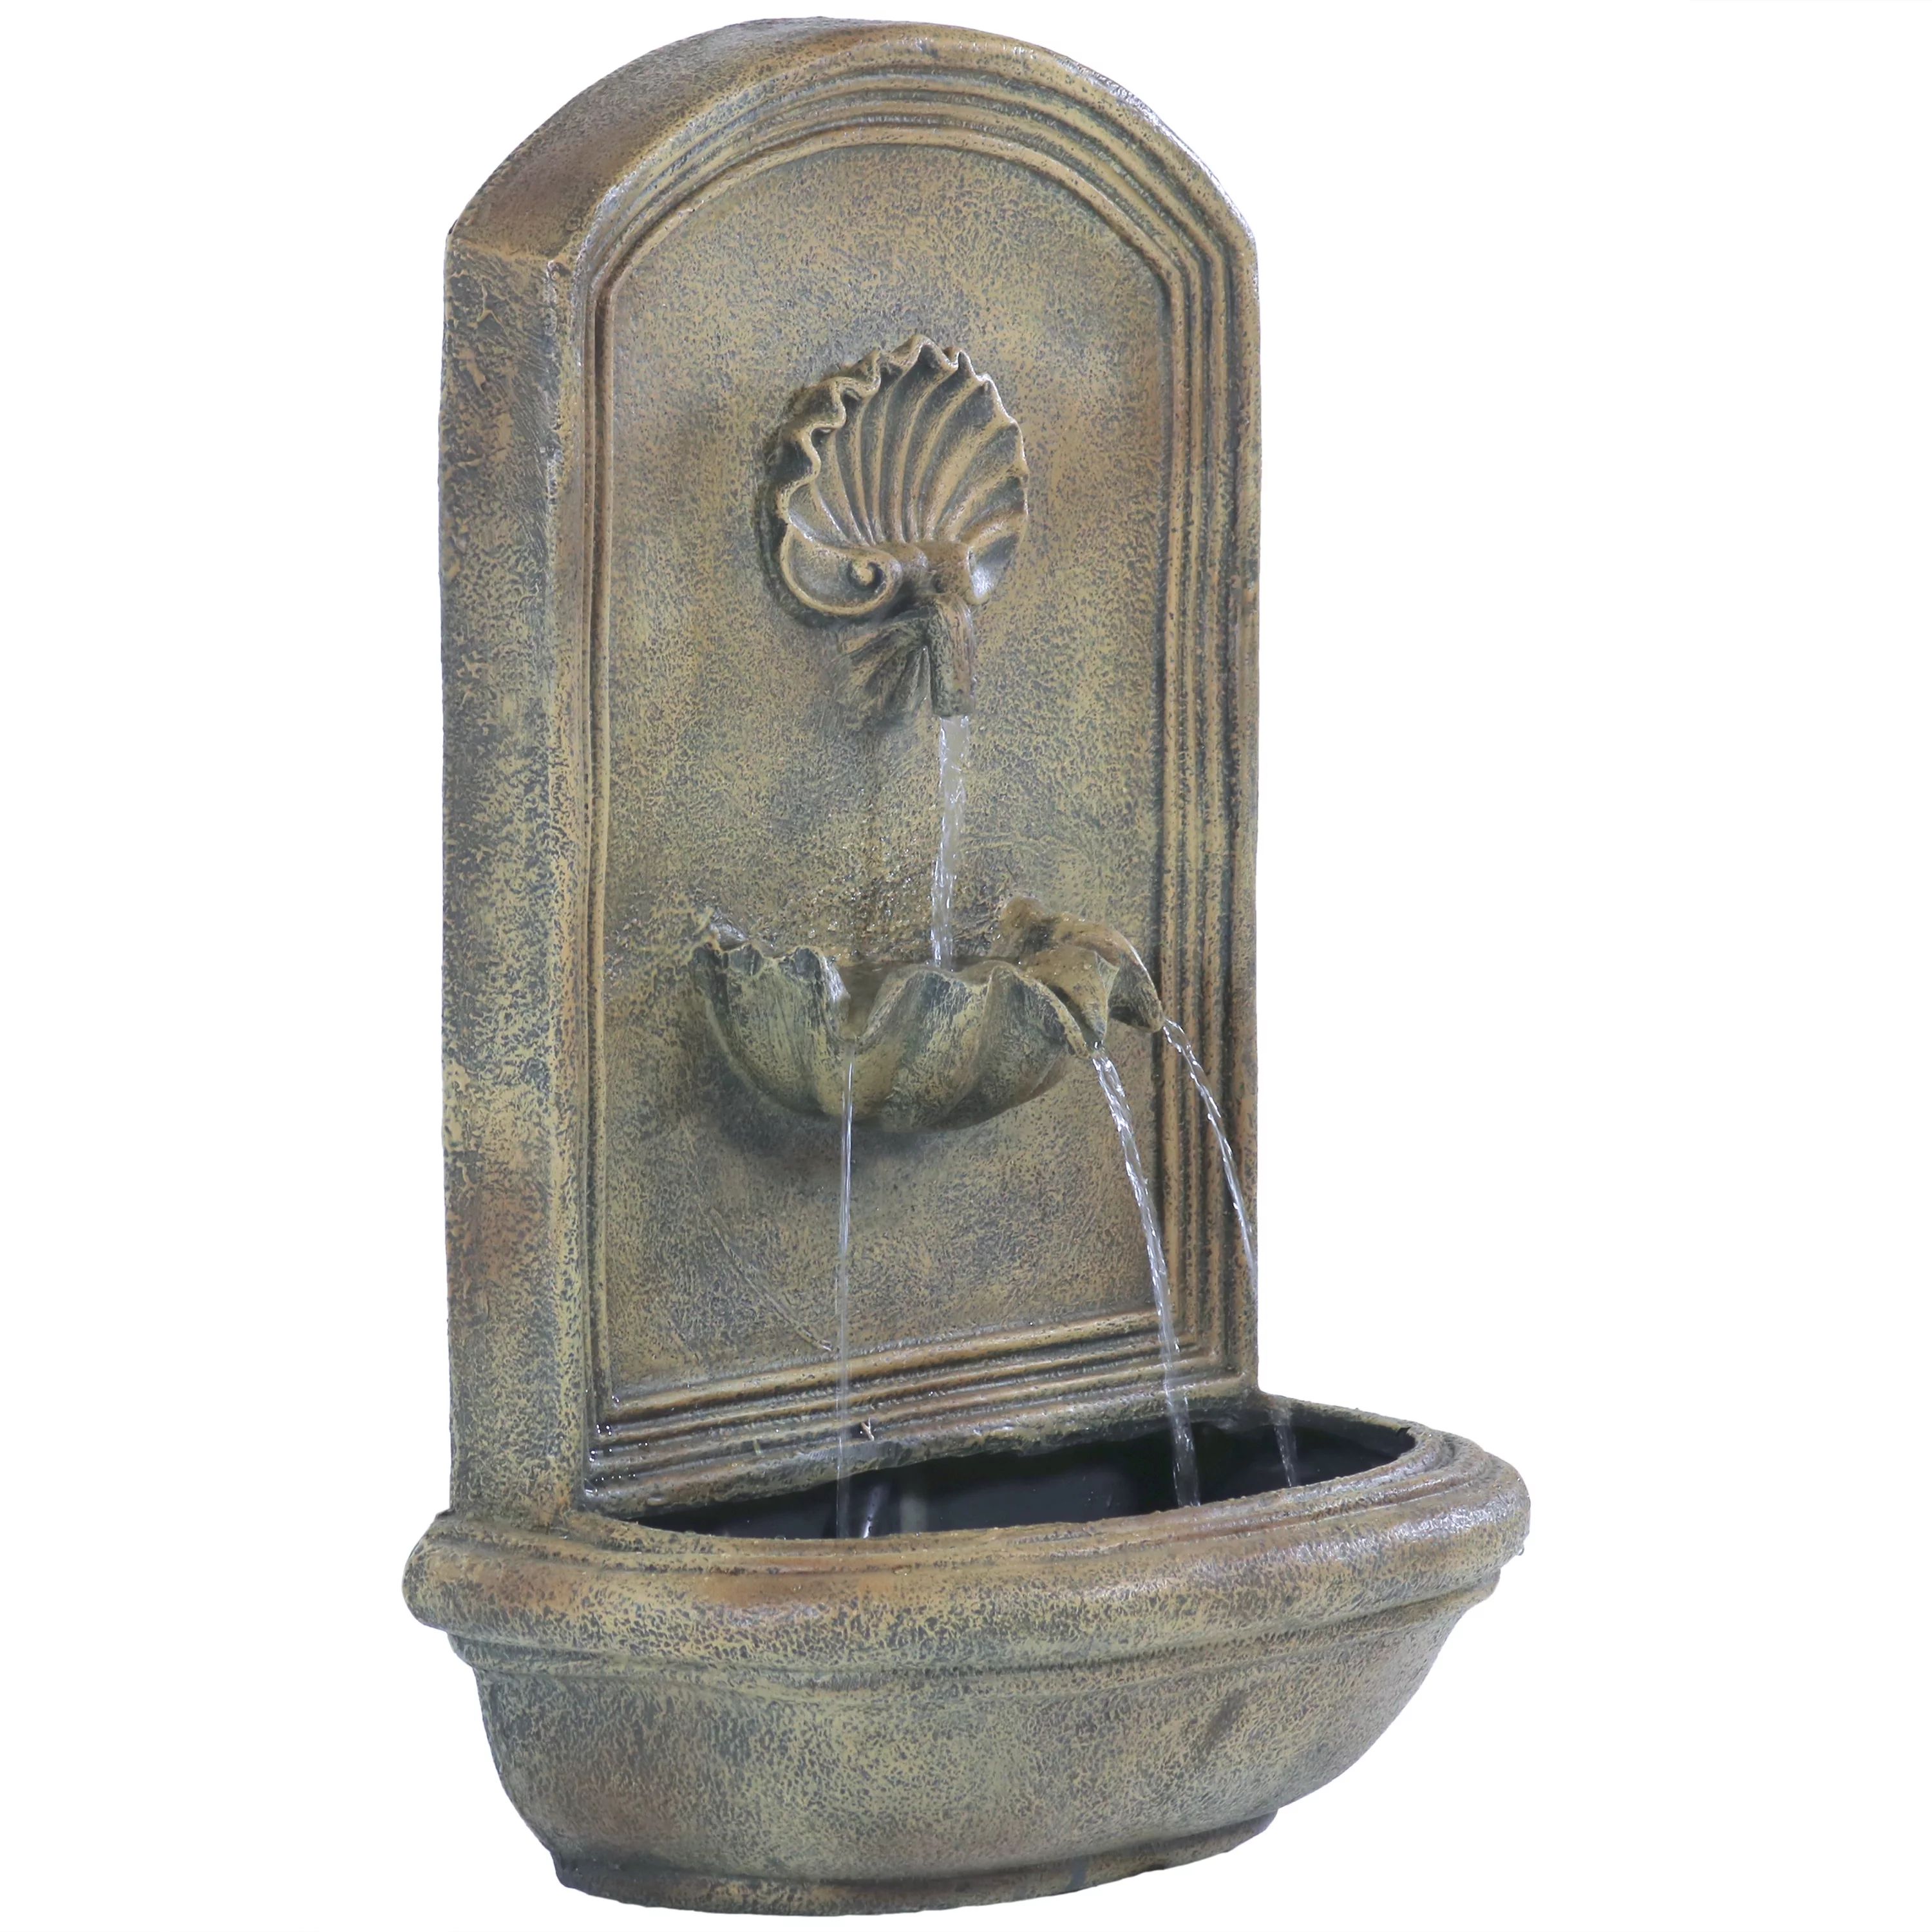 Sunnydaze Seaside Outdoor Wall Fountain with Electric Pump - 27" H - Florentine Stone | Walmart (US)